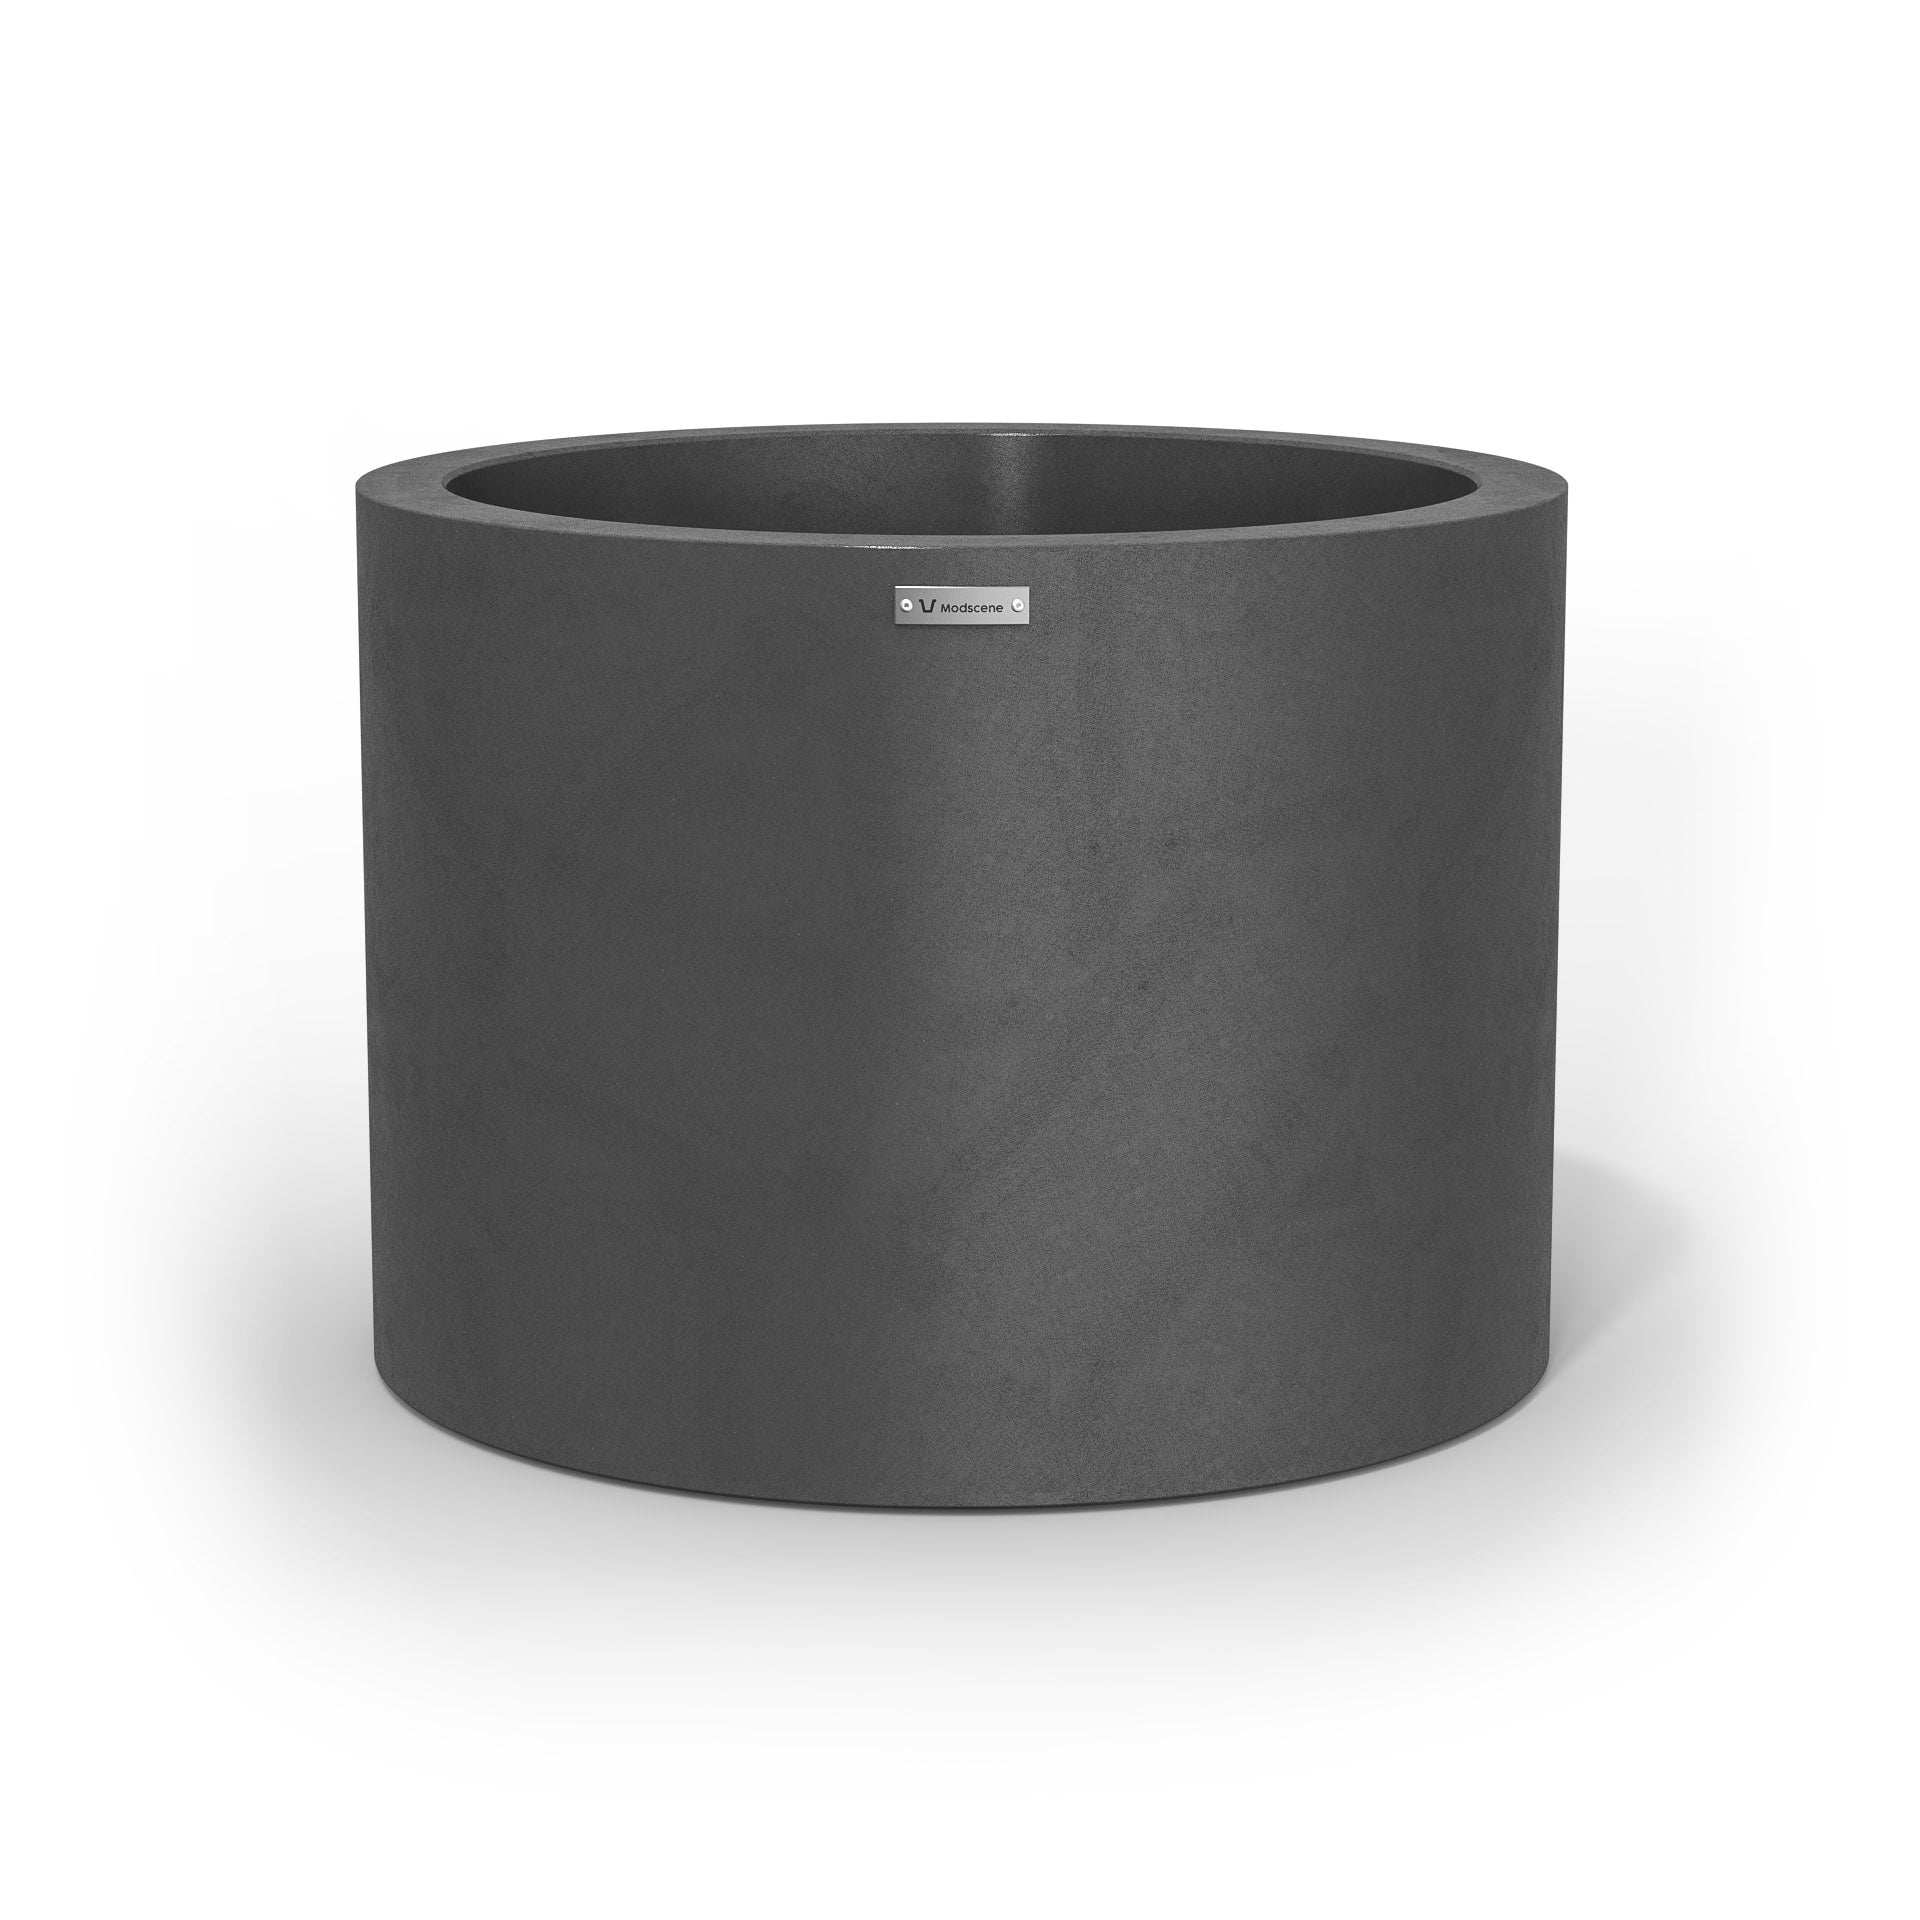 A cylinder shaped pot planter in a brushed dark grey colour.